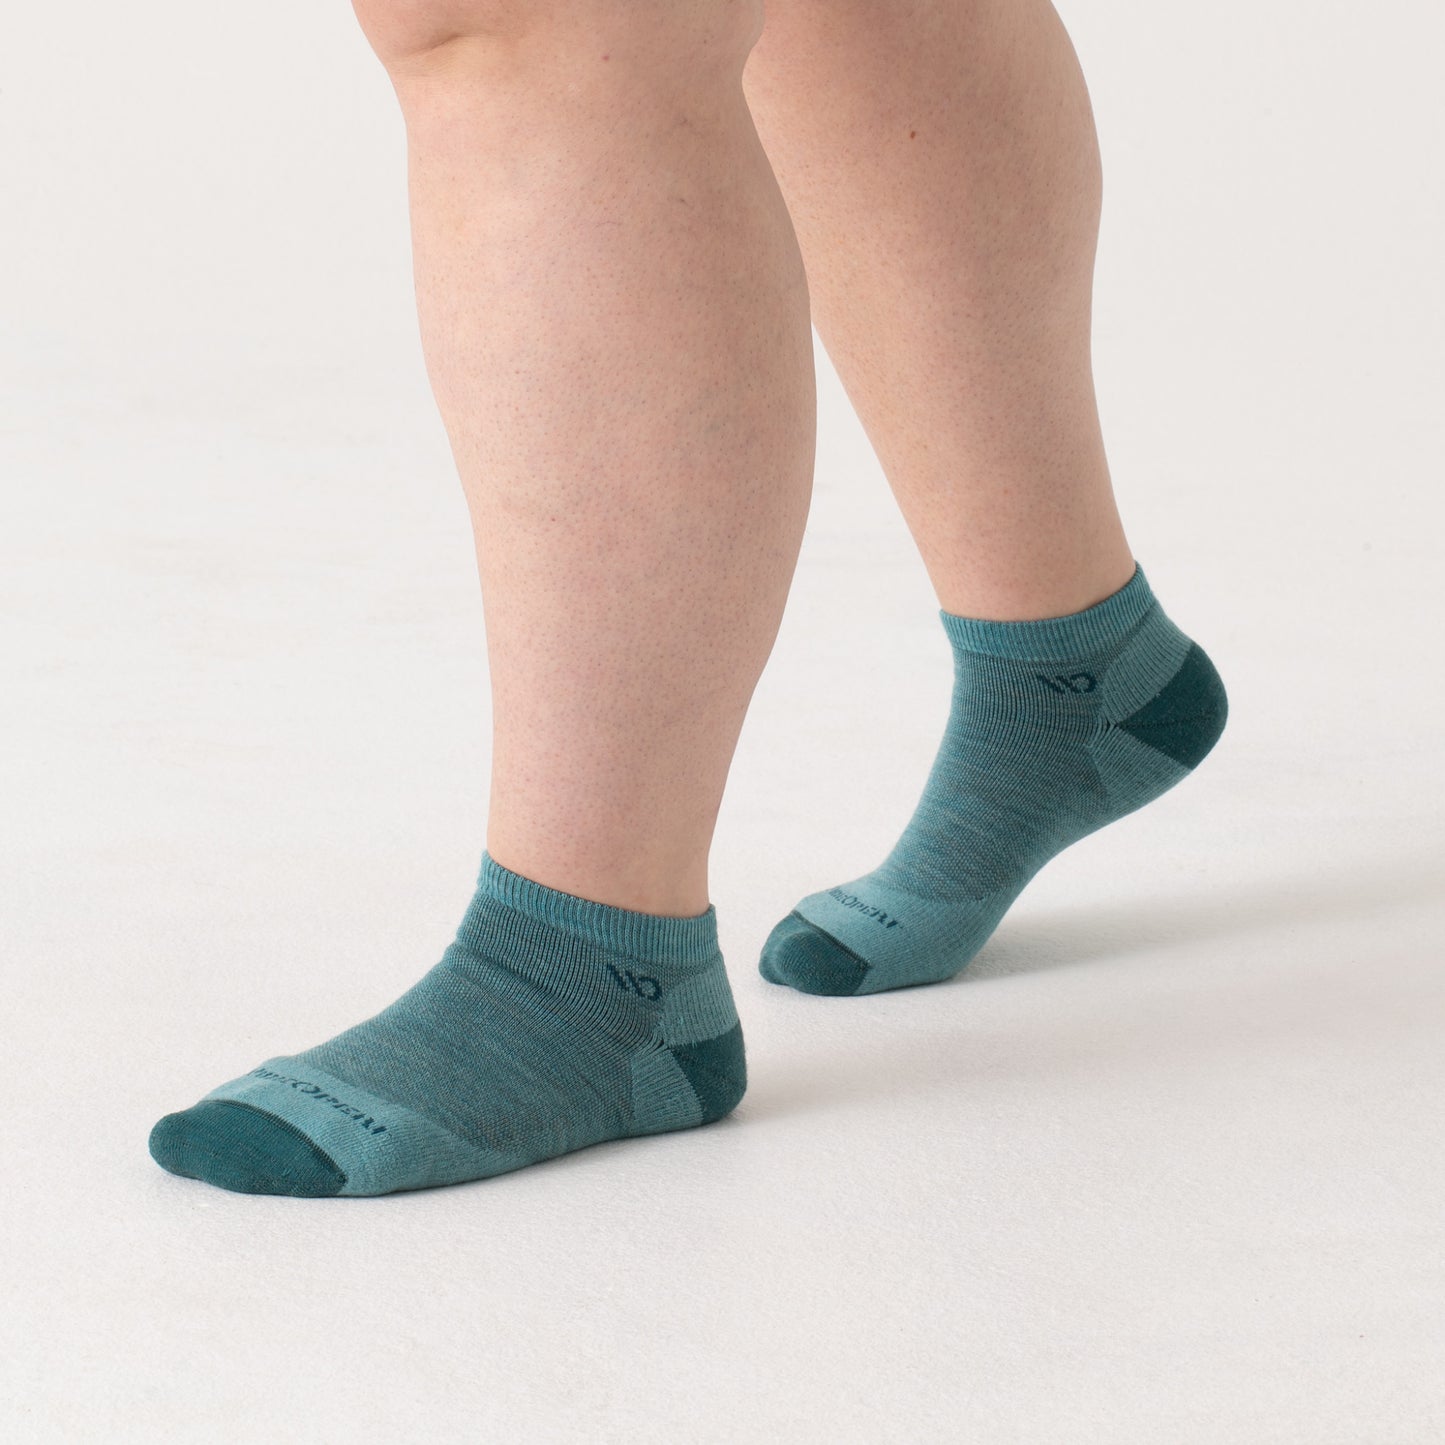 On model: No shows with dark teal heel/toe and logo, with light teal body --Light Teal